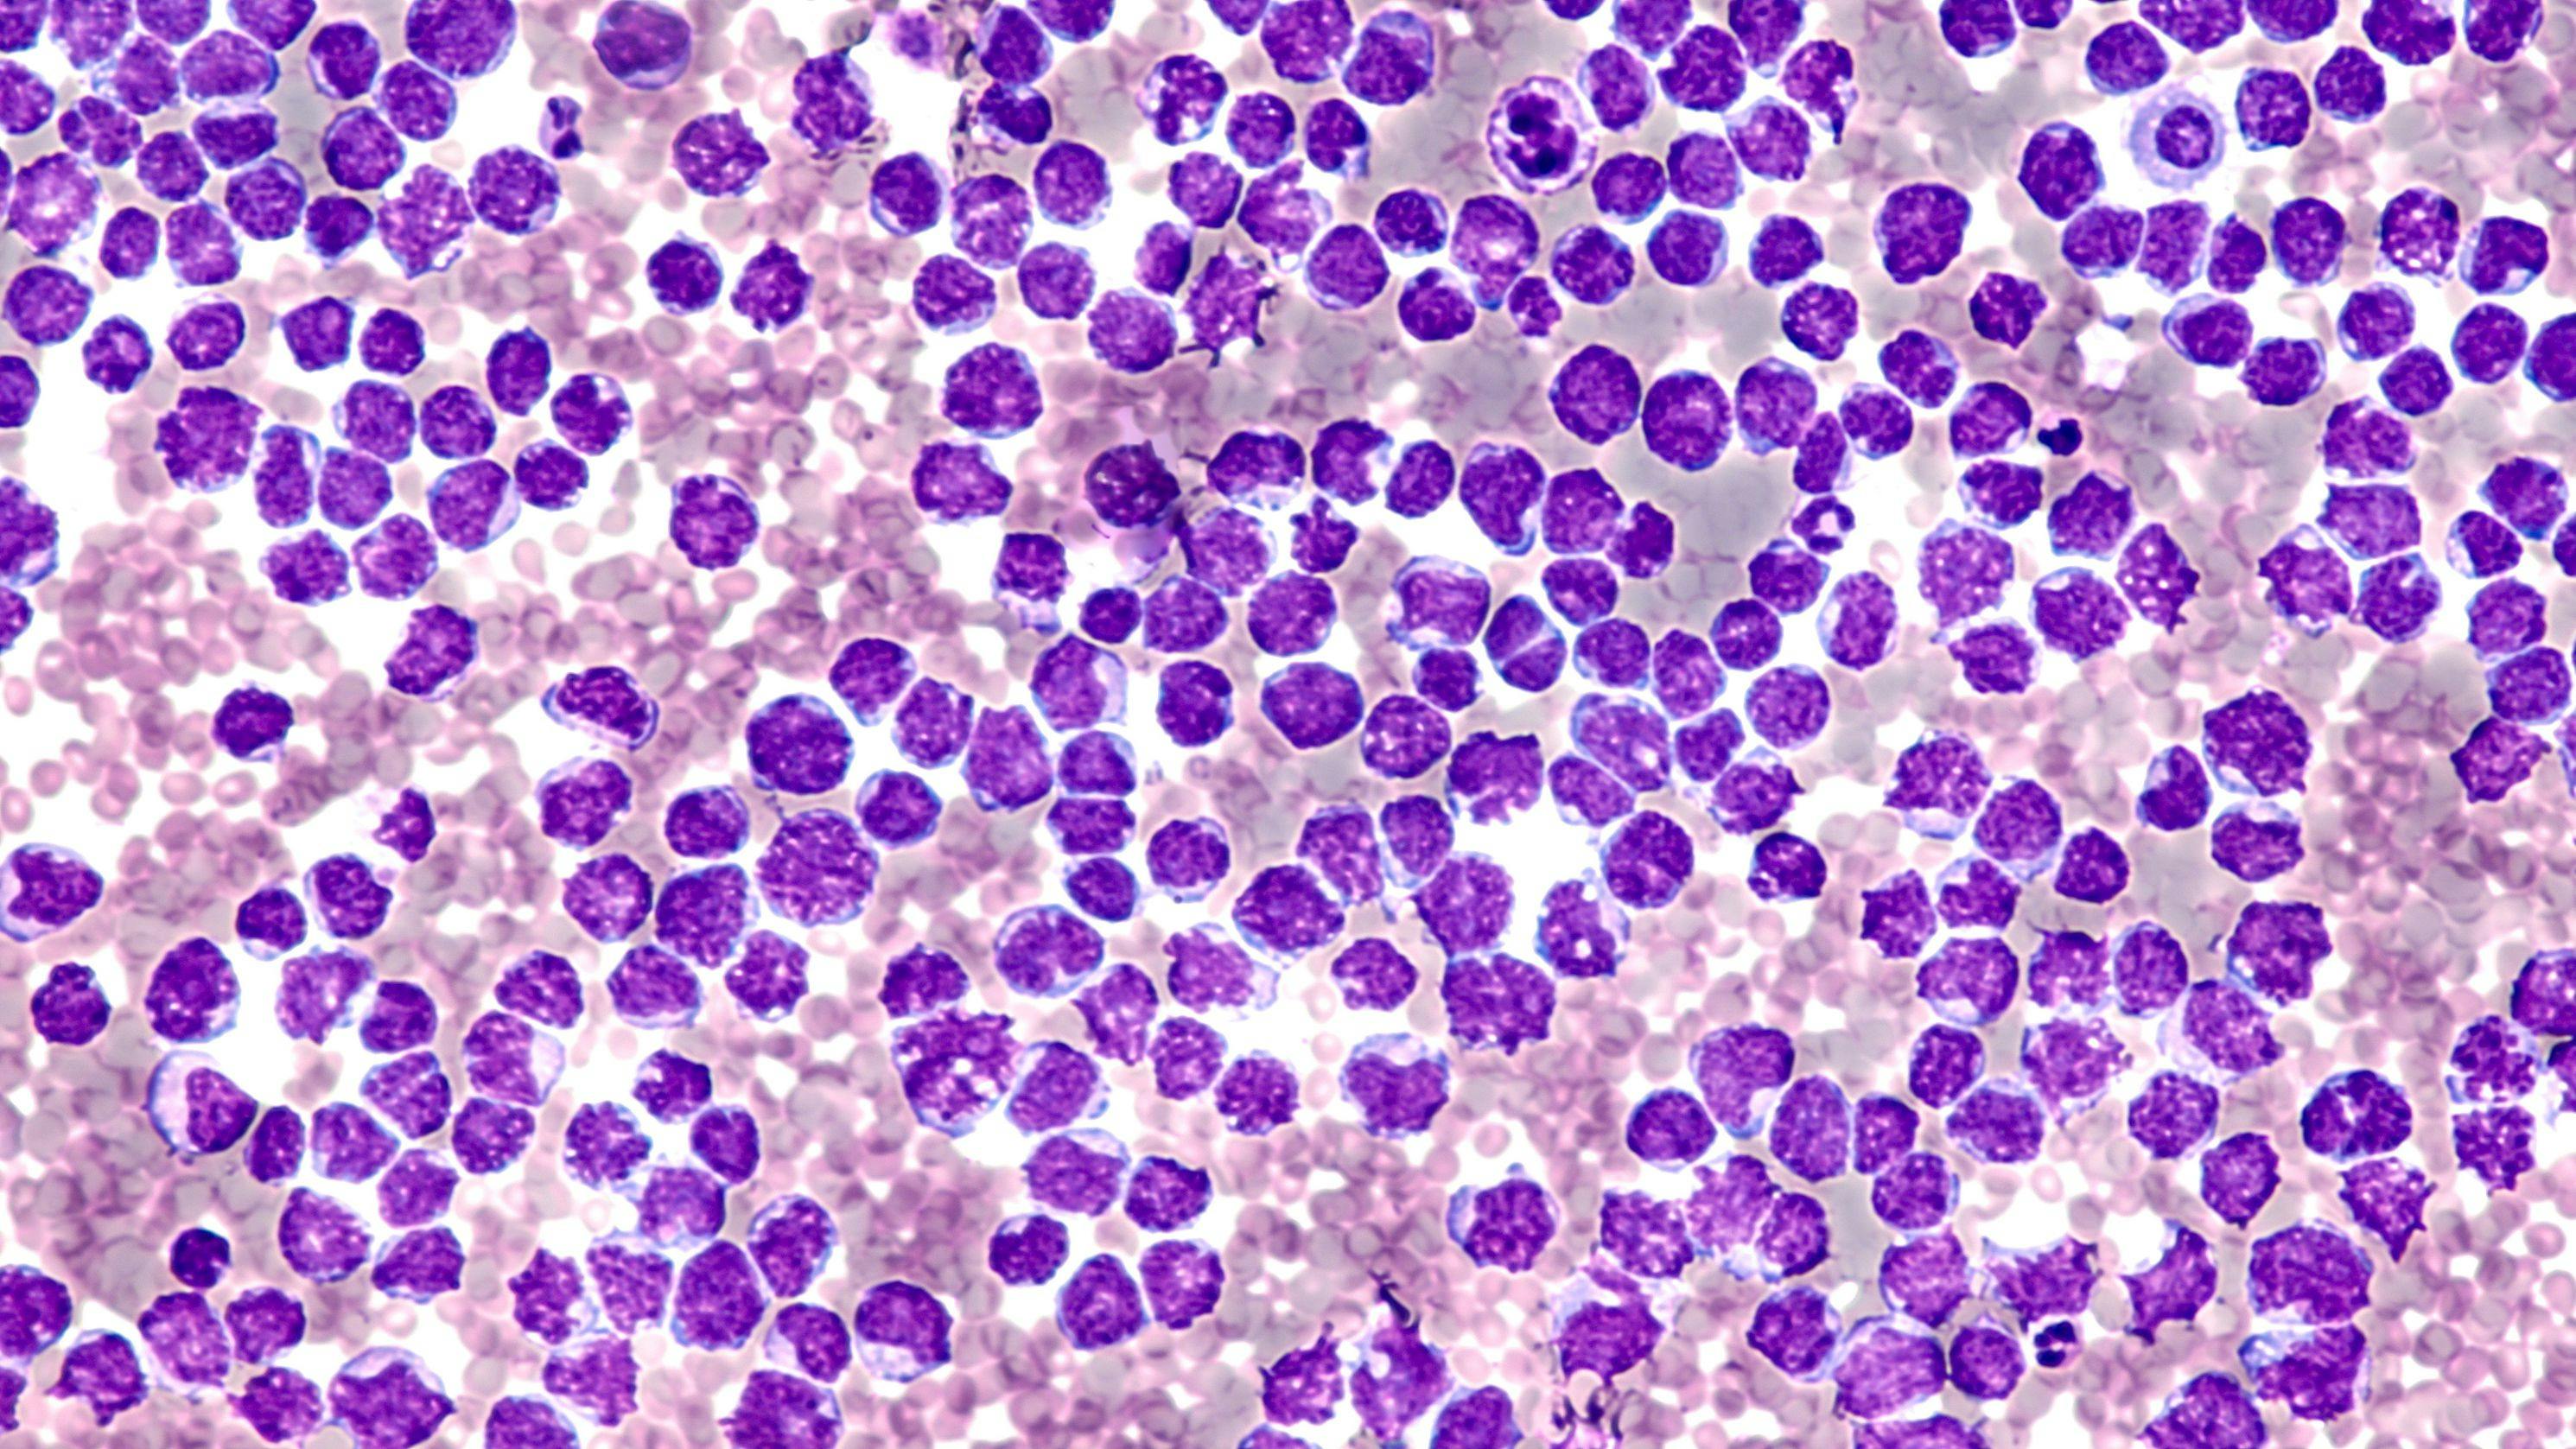 Pleural fluid cytology showing involvement by malignant cells of a mantle cell lymphoma, pleomorphic variant. | Image Credit: © David A. Litman - www.stock.adobe.com